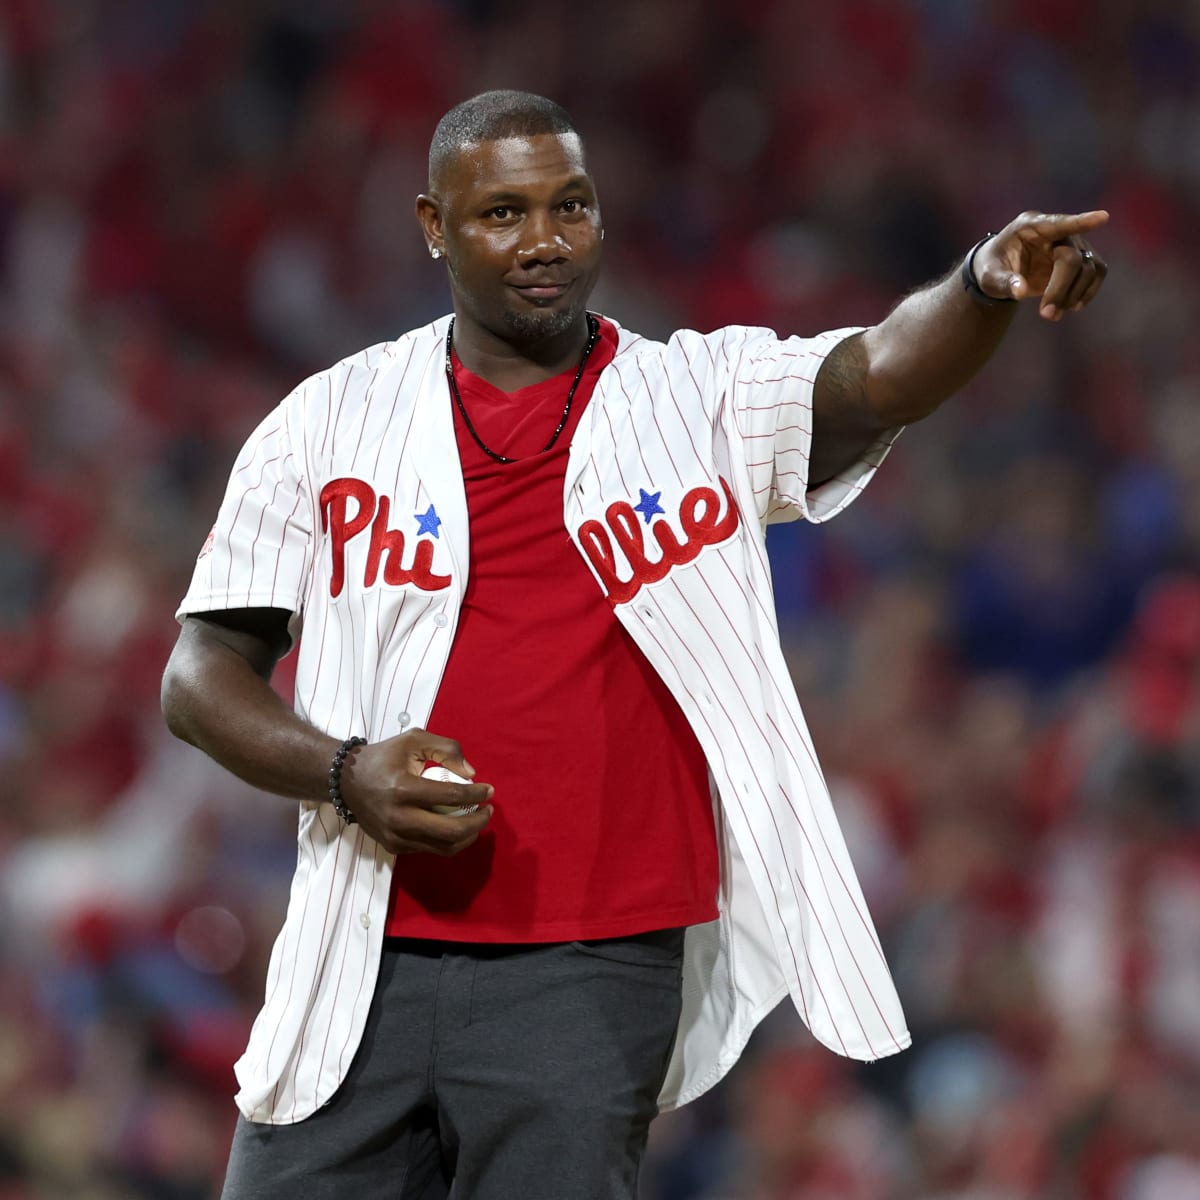 Who Is Most Likely to Throw Out the Philadelphia Phillies First